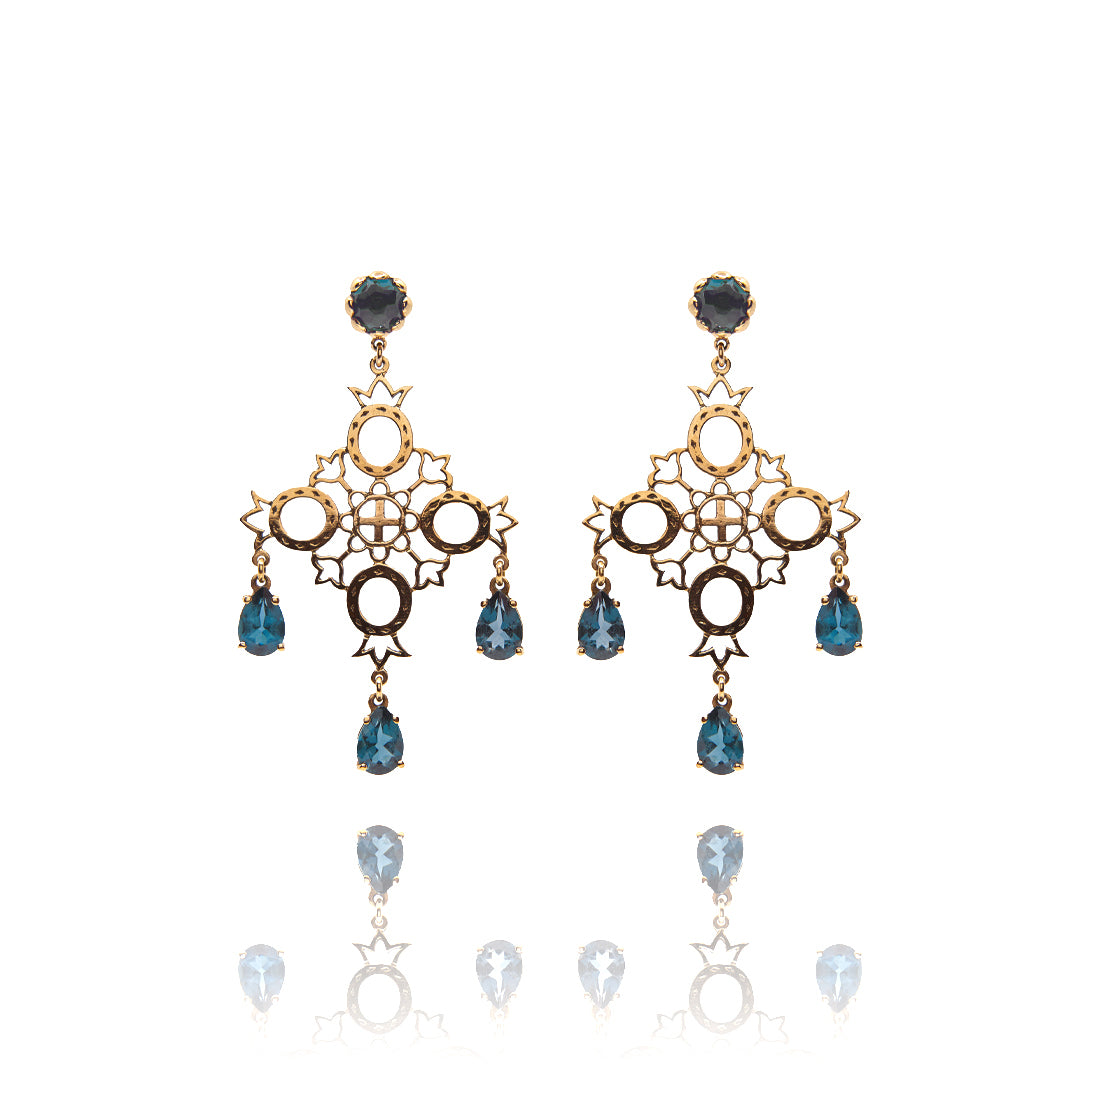 Rose gold earrings with London blue topaz